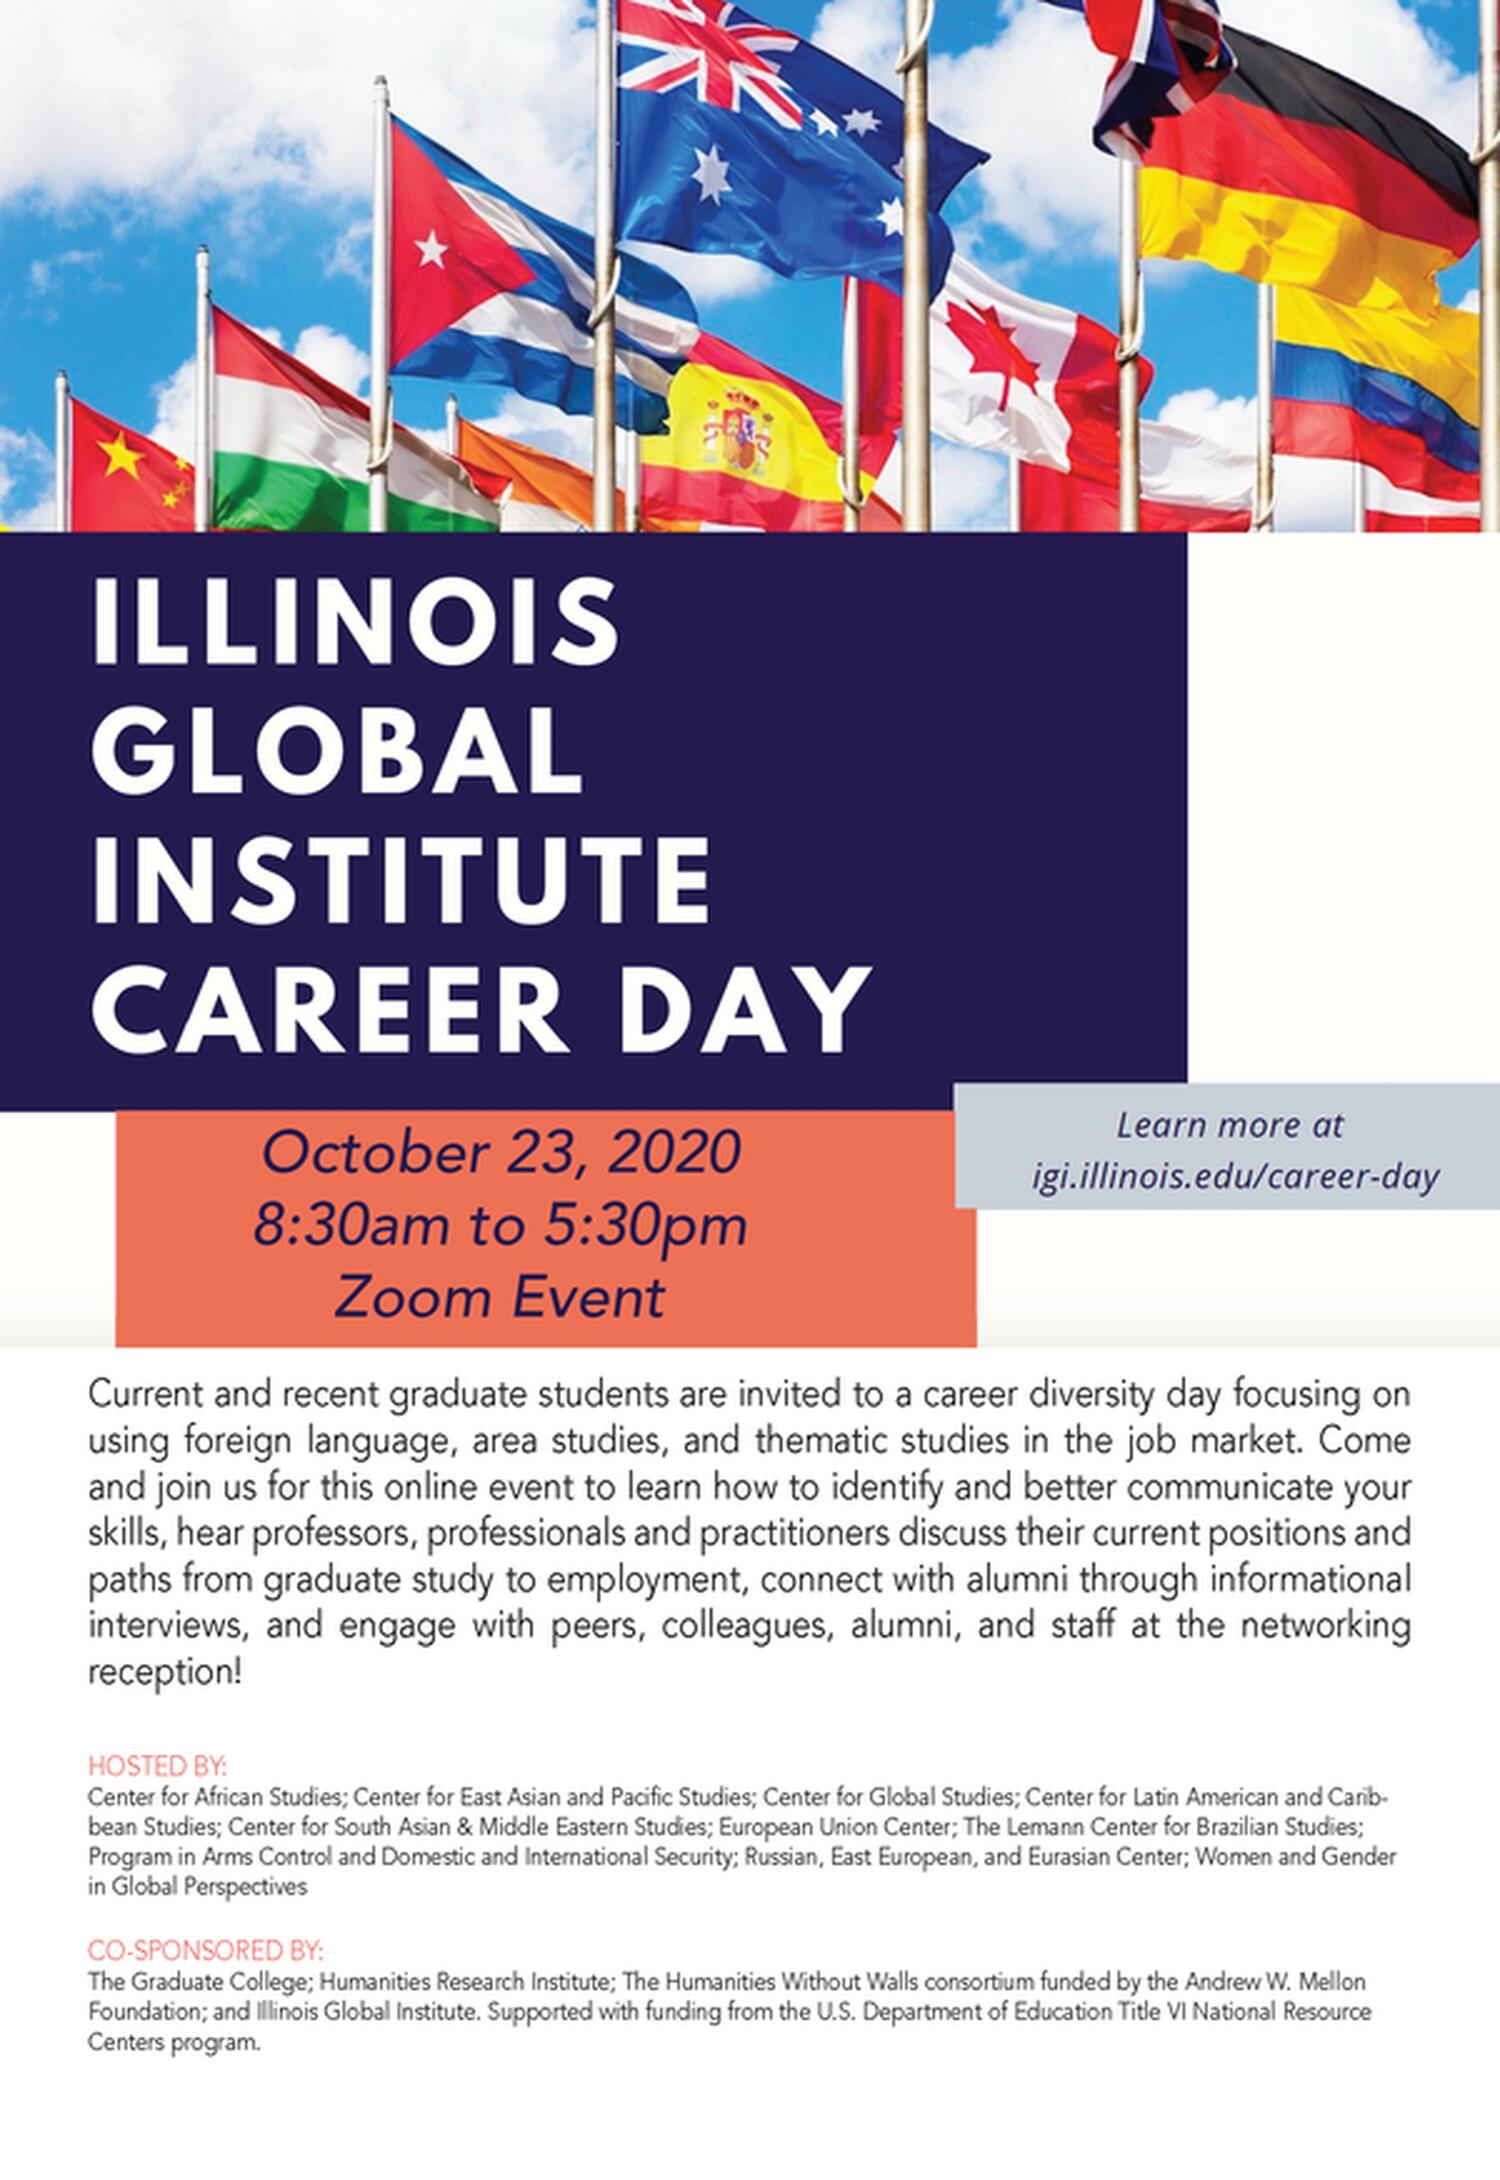 Illinois Global Institute Career Day